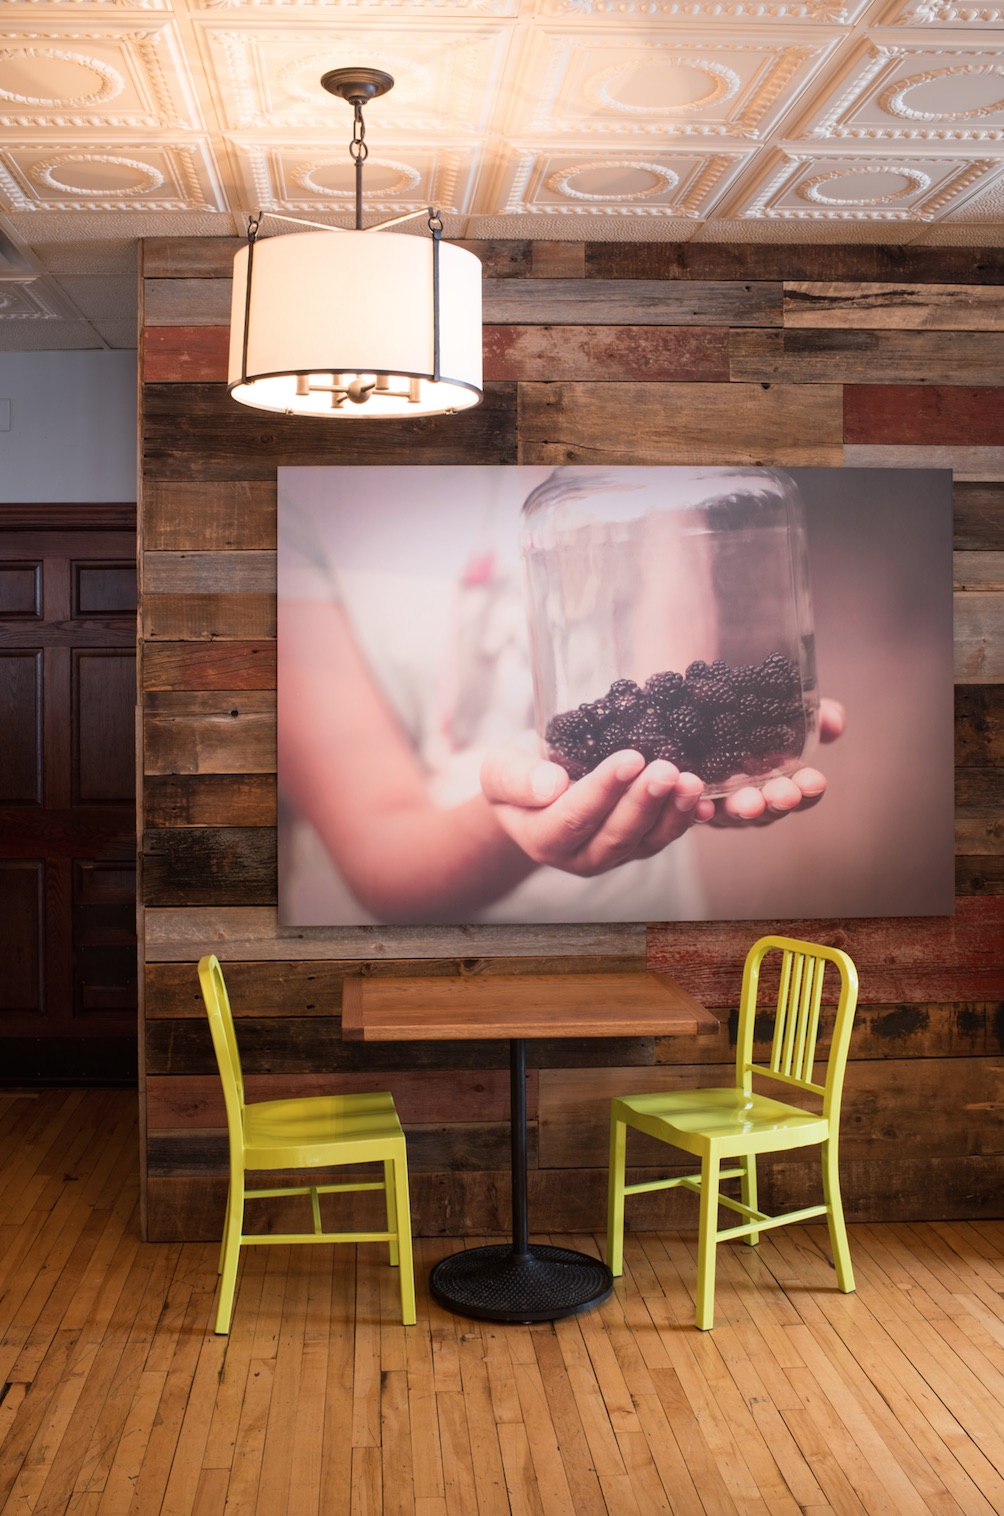 A barn wood wall design and tin ceiling tiles welcome market guests at this Glen Ellyn restaurant.